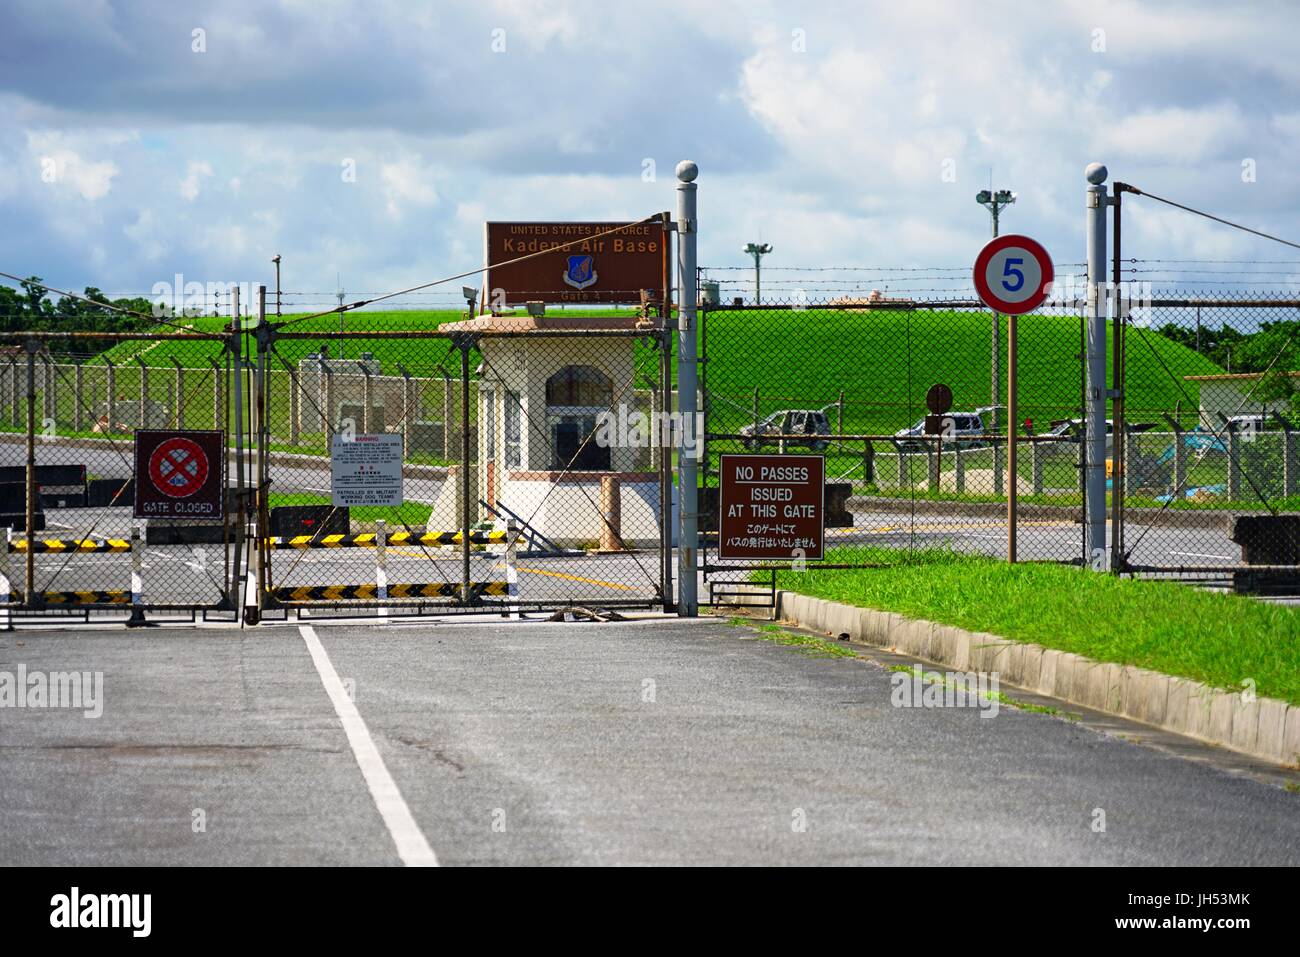 Entrance of the Kadena Air Base, a United States Air Force Base in Naha, Okinawa, home to a large American military presence of United States Forces Stock Photo